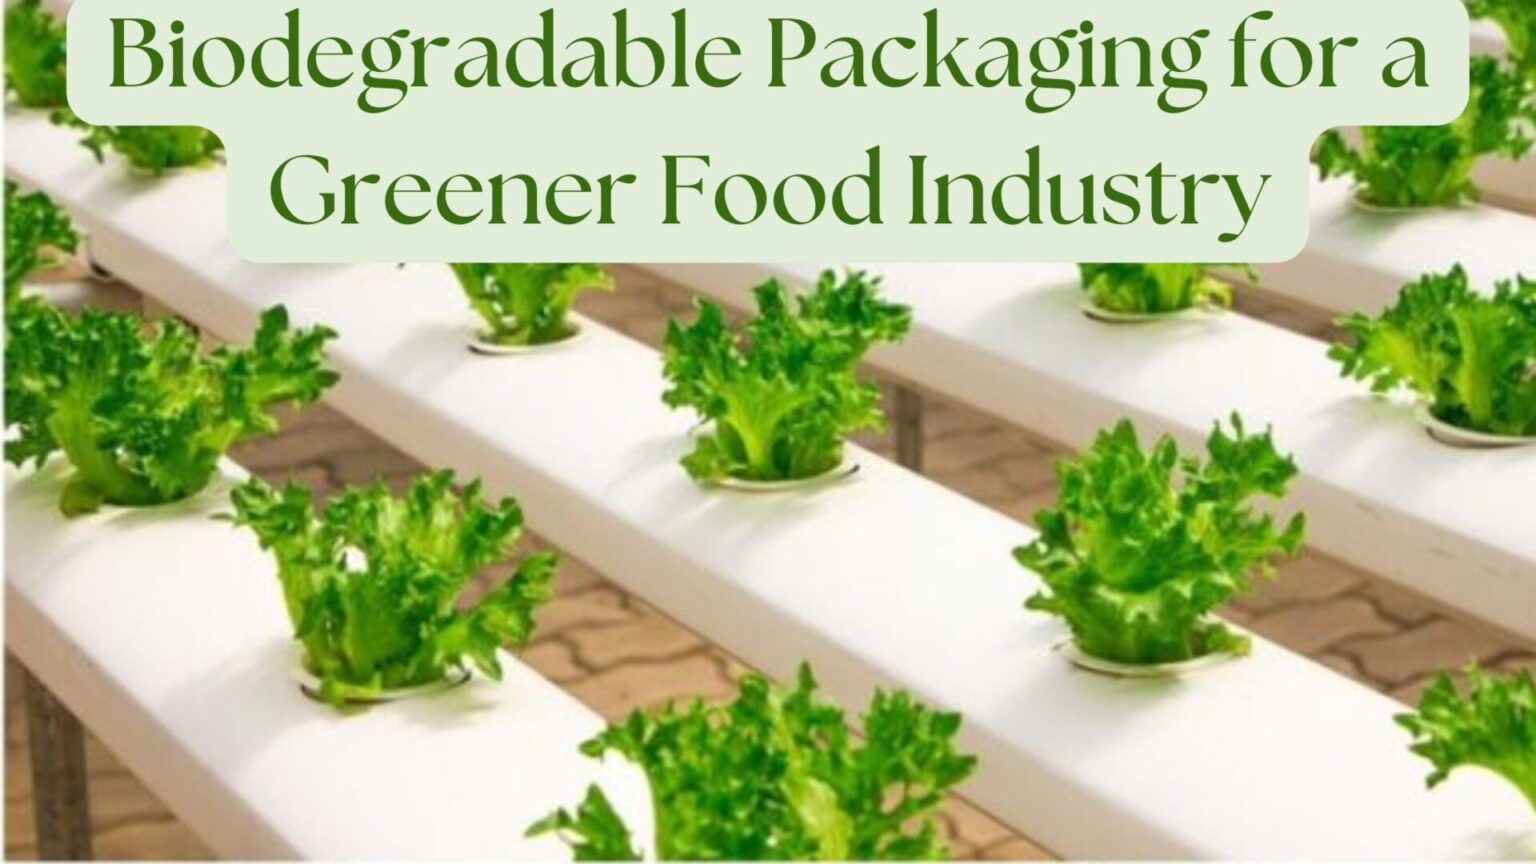 Biodegradable Packaging for a Greener Food Industry